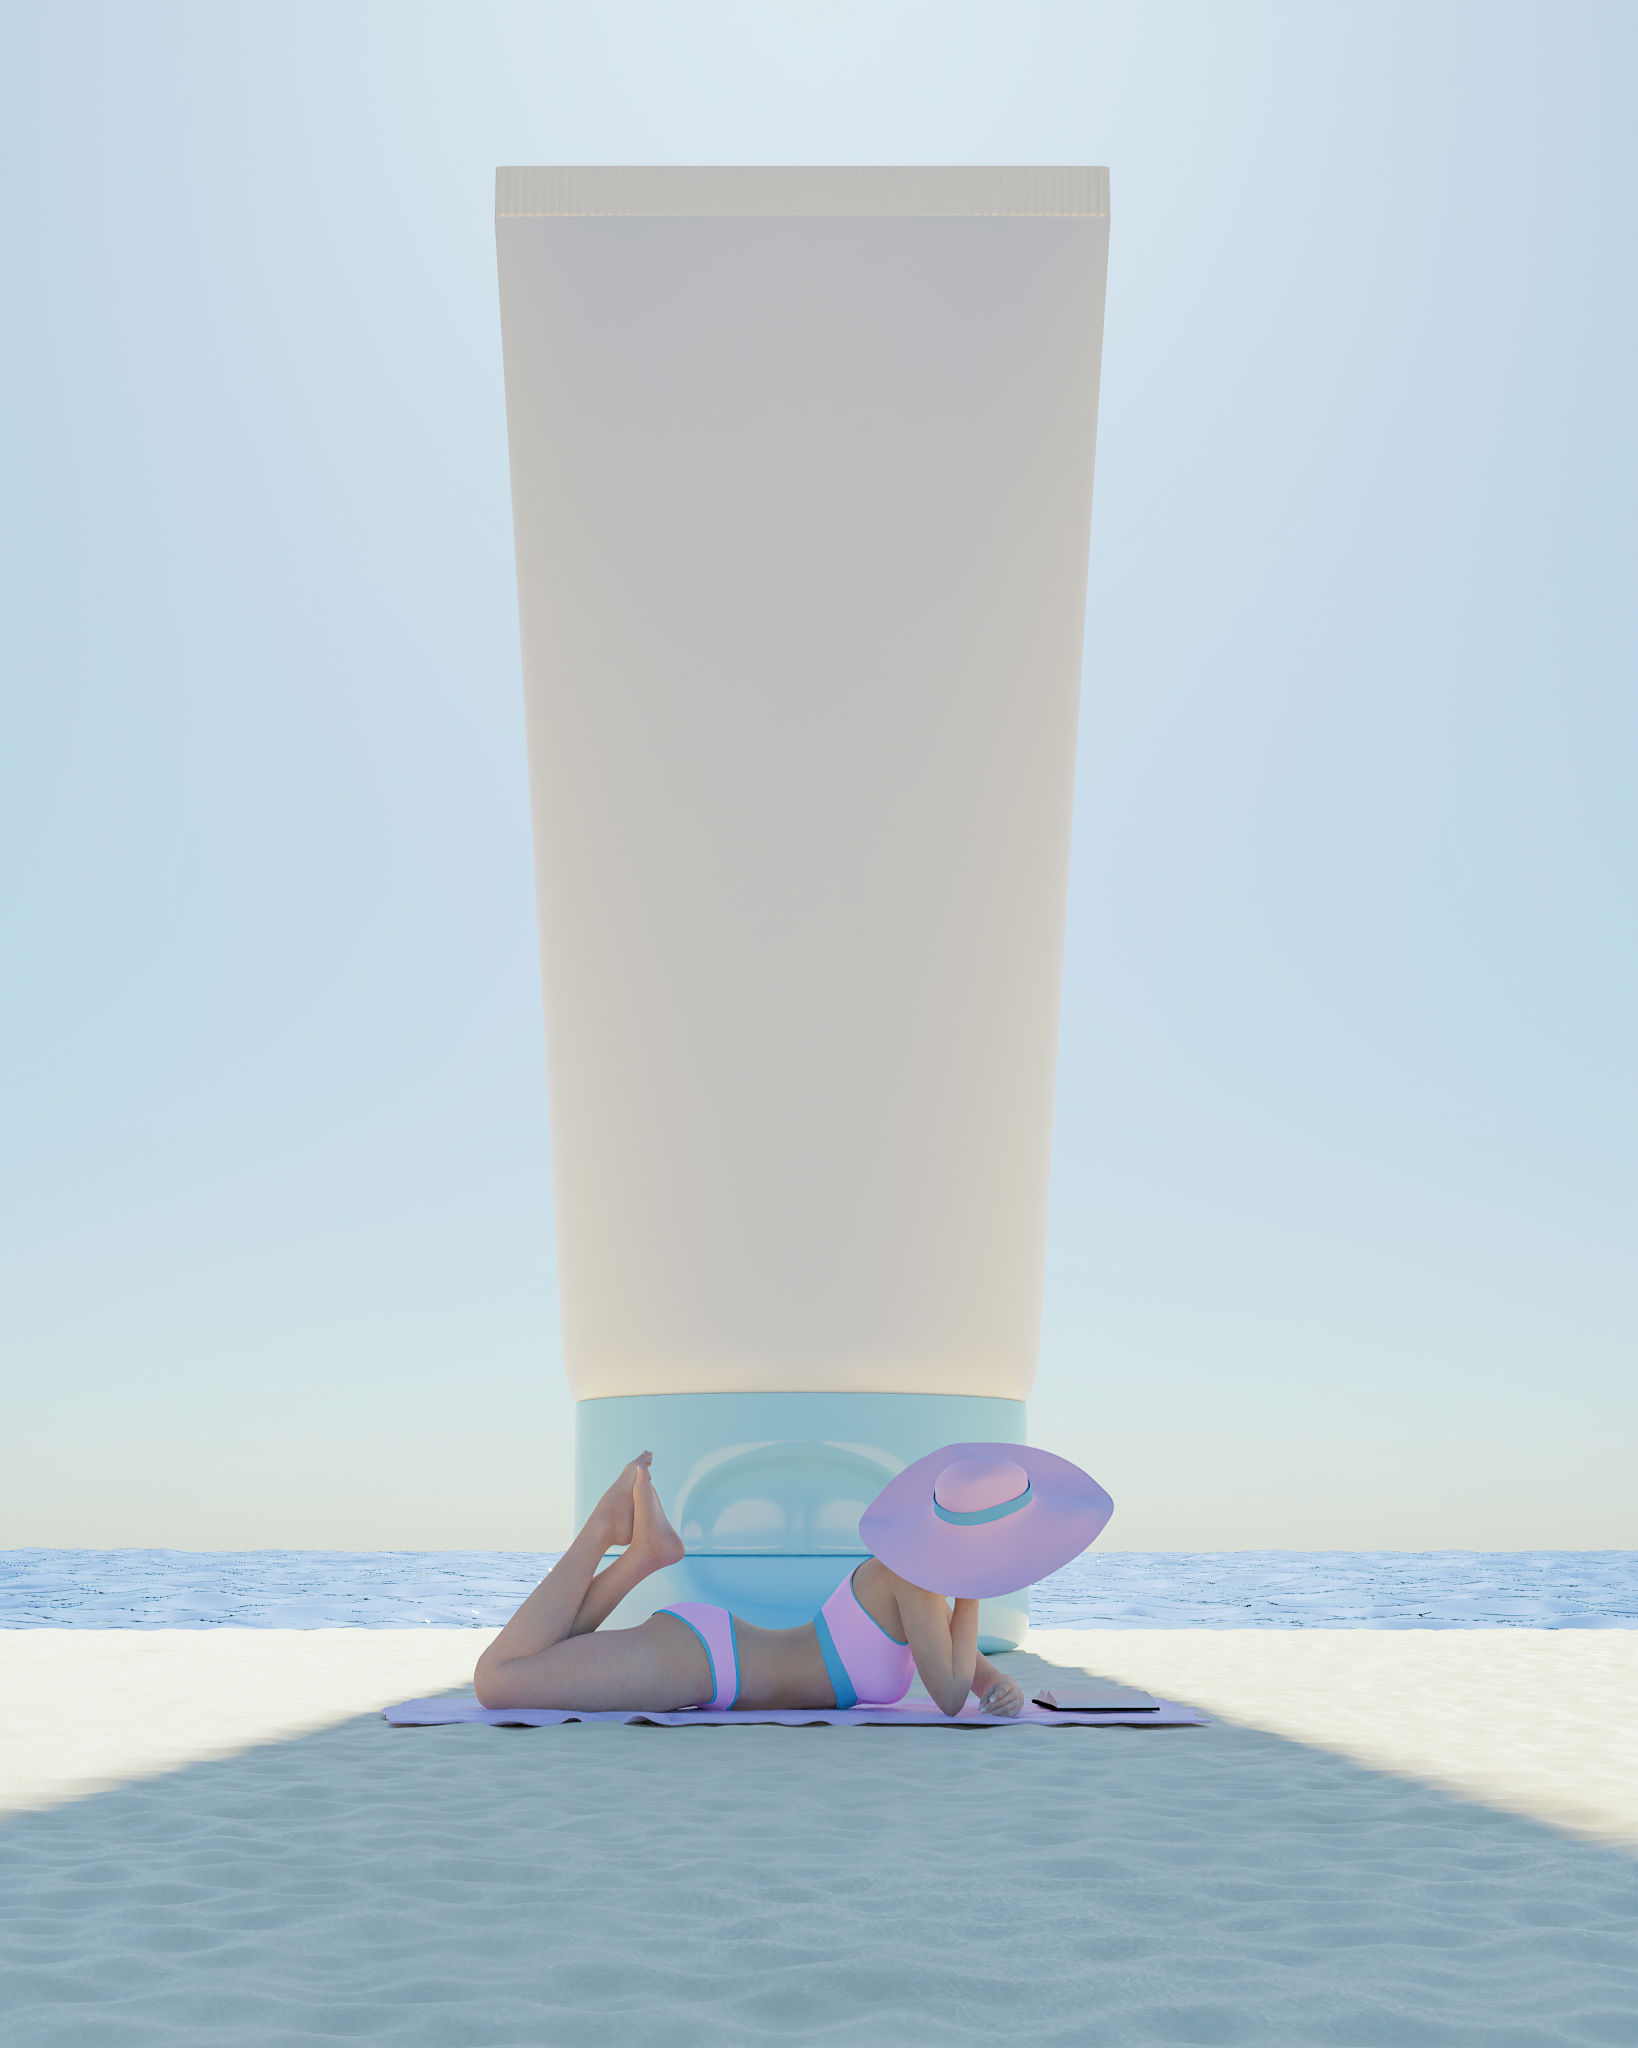 giant sunscreen canister shading woman lying on the beach fine art photography